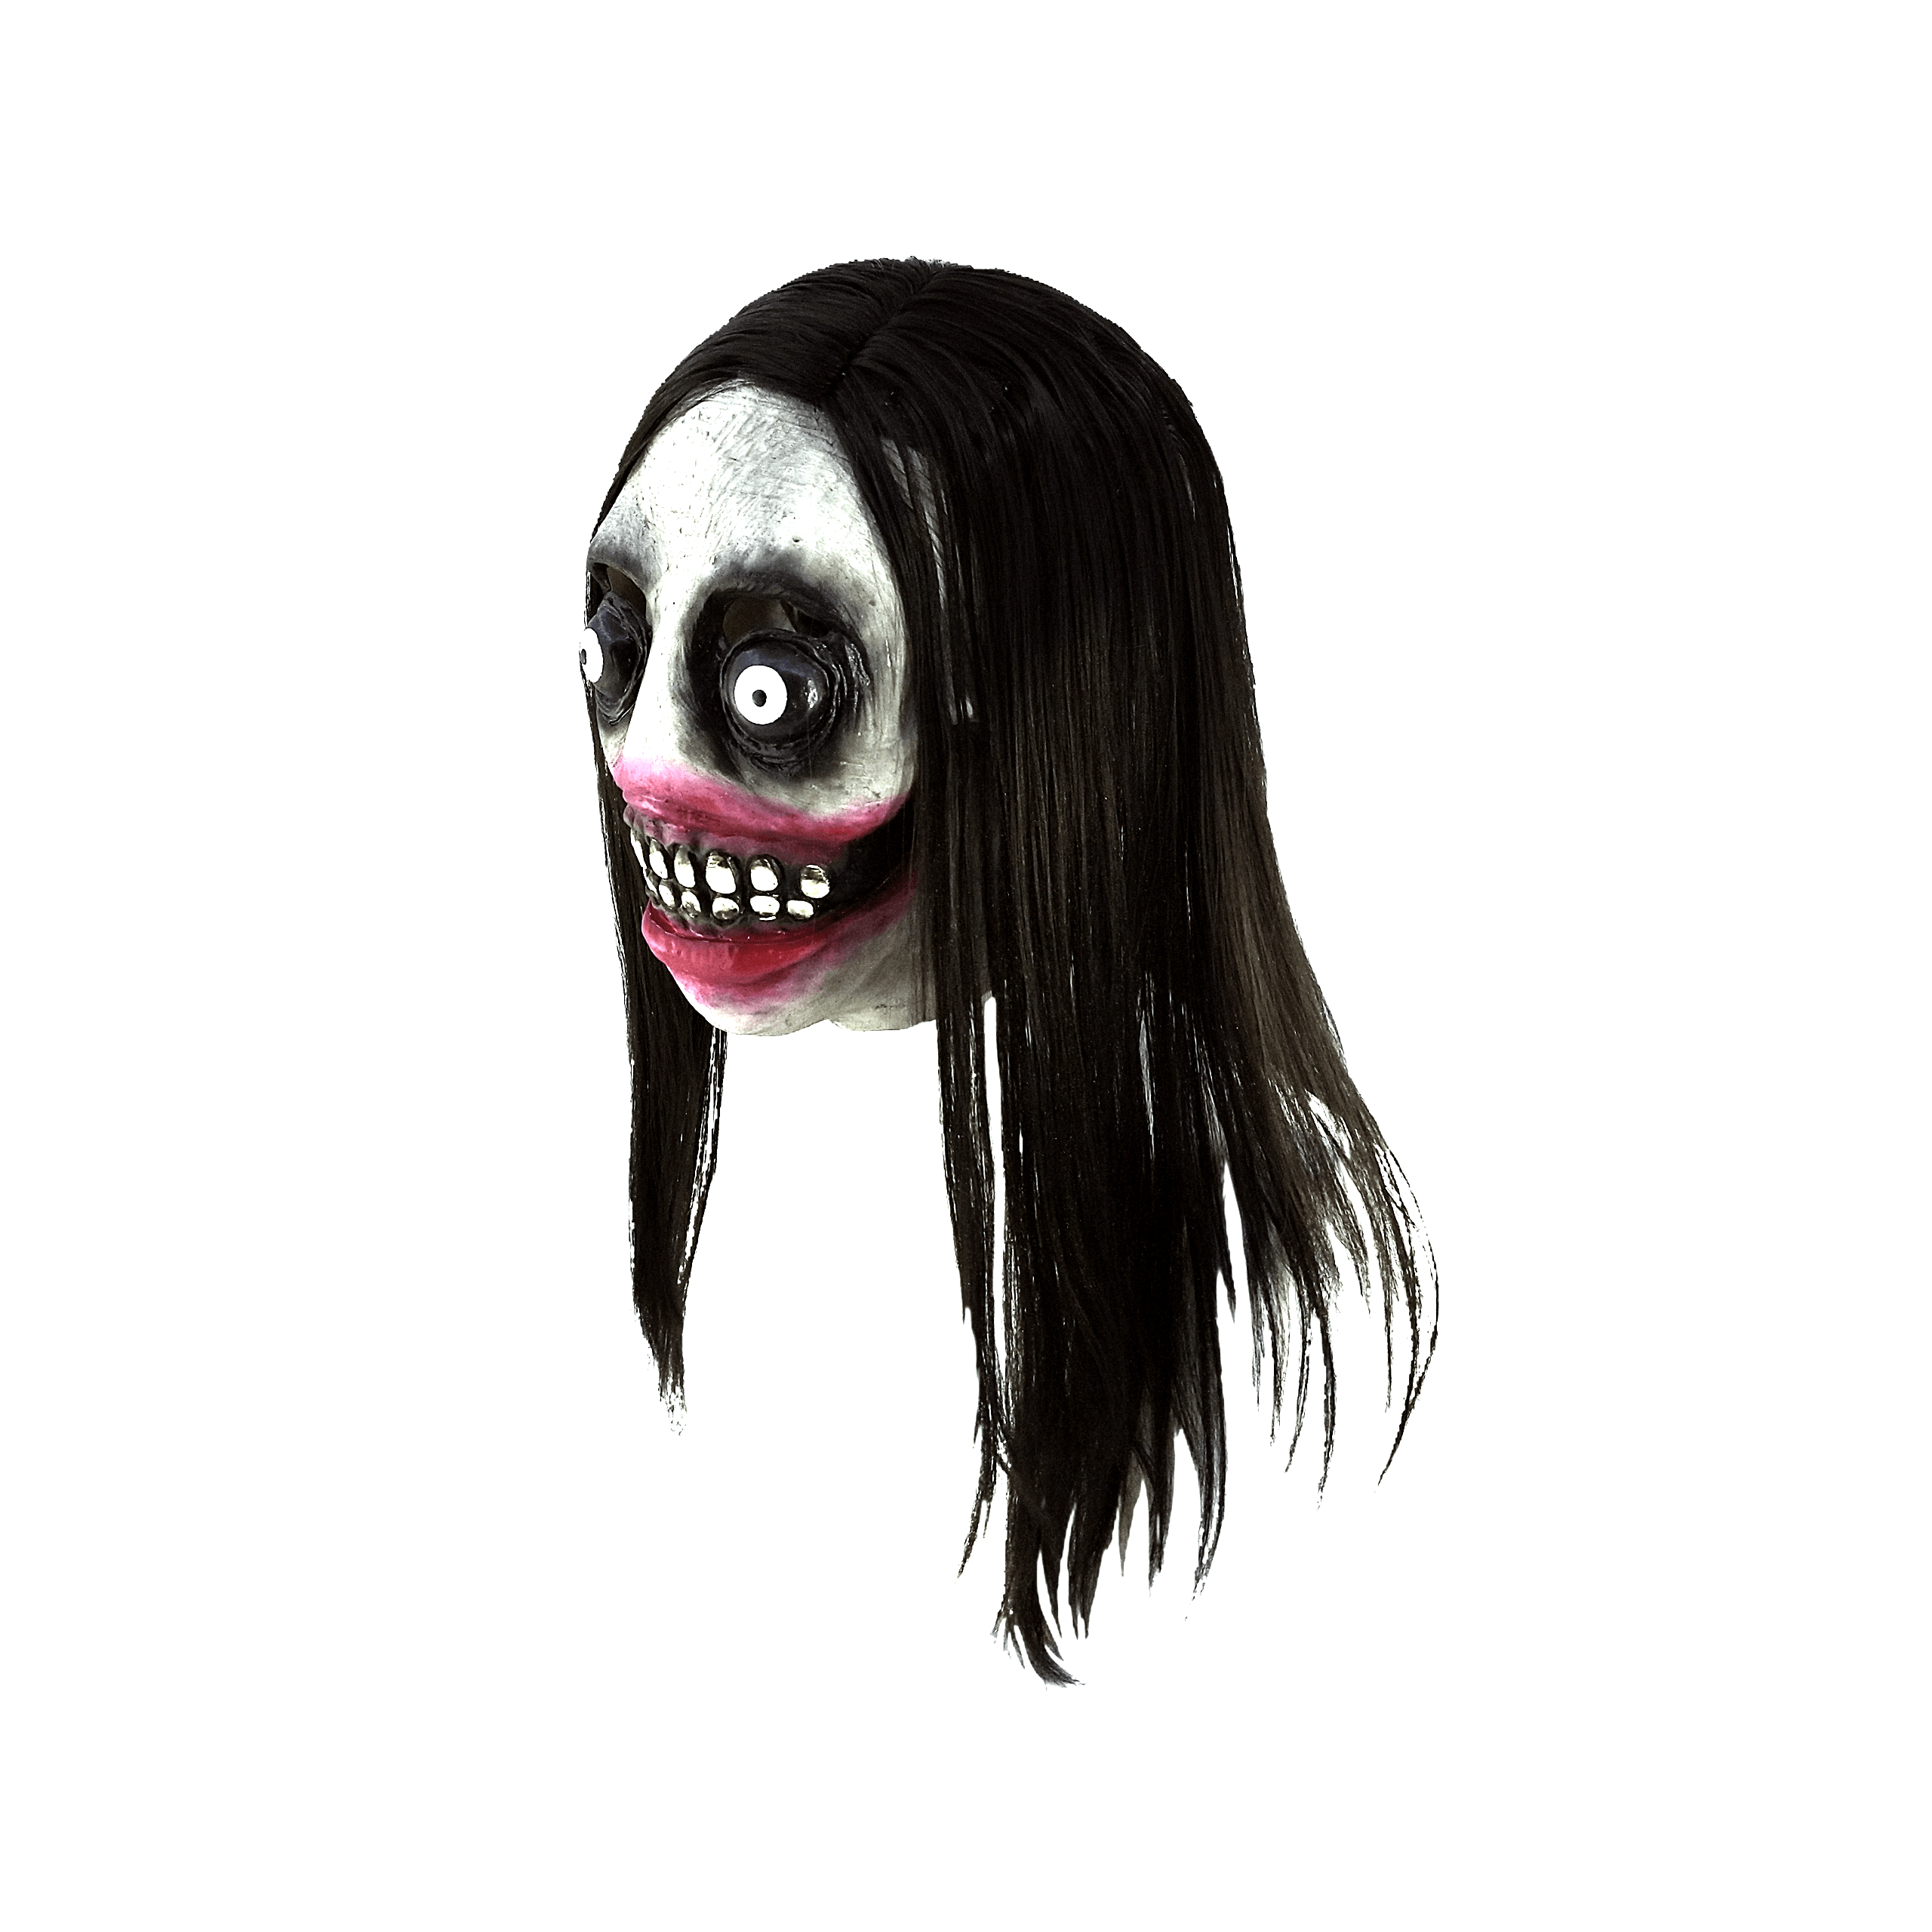 Drawing JEFF THE KILLER in Different Styles (SCARY) 